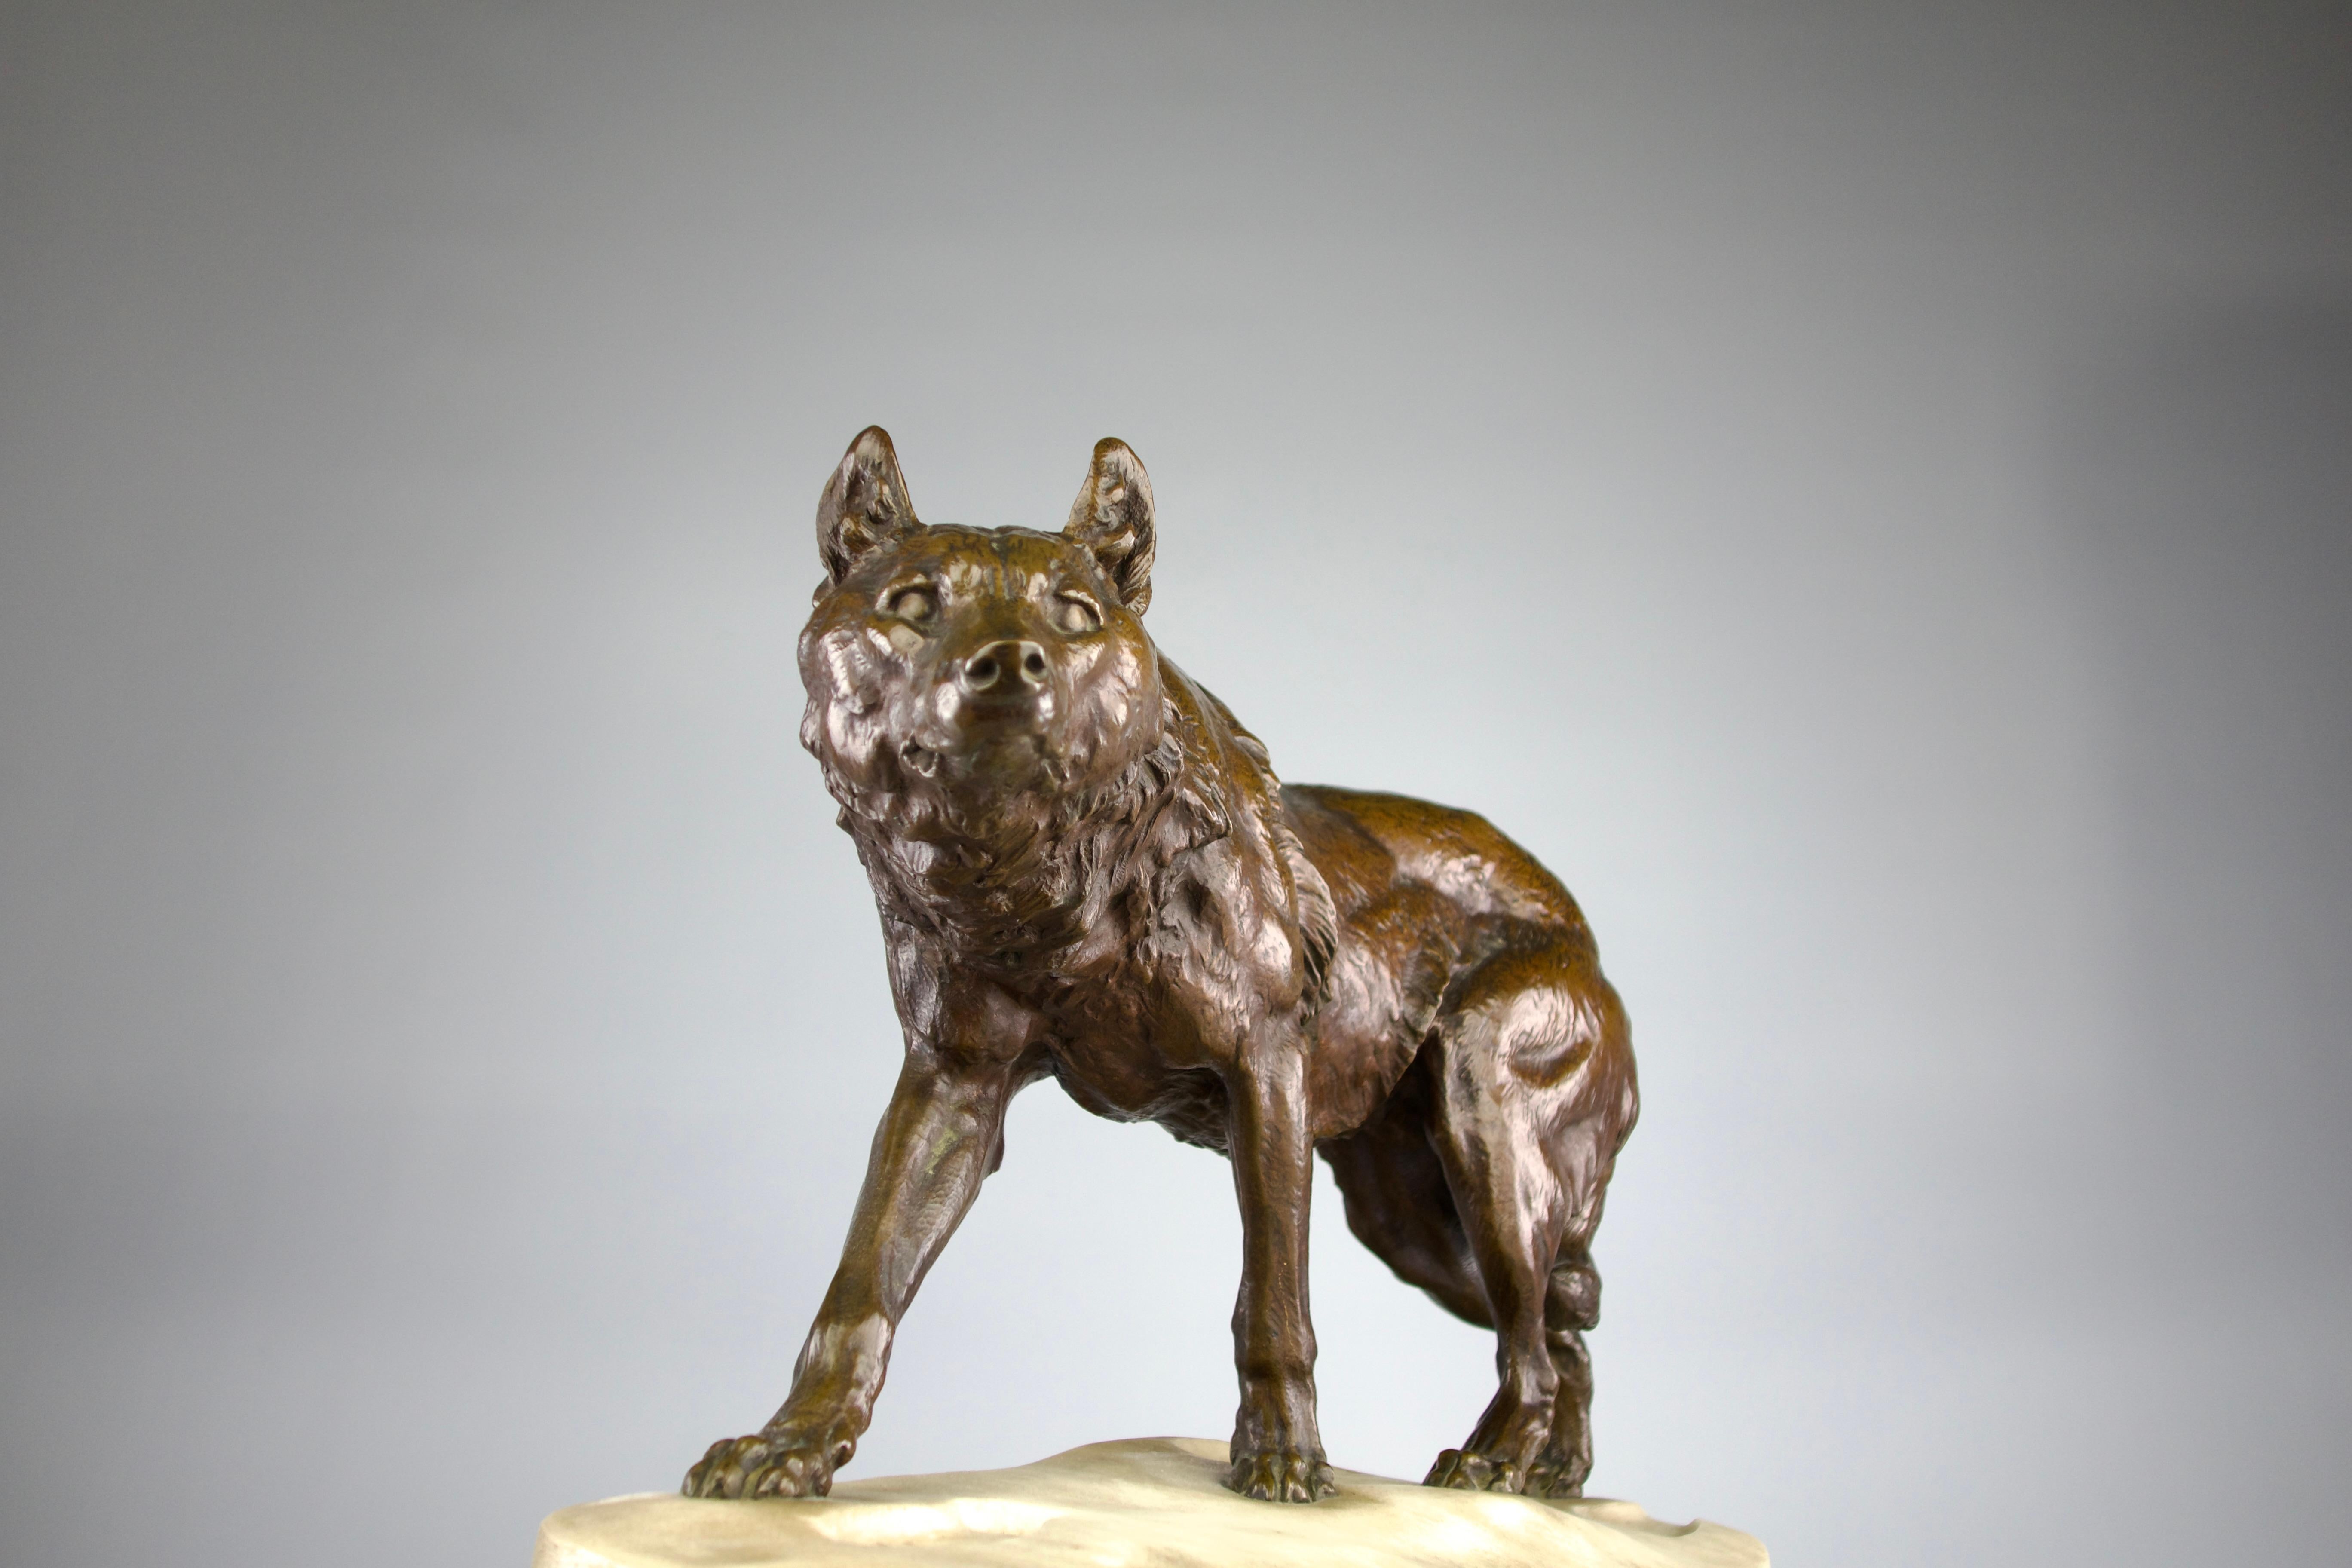 Carved Charles Valton, The Tracking Wolf, Romantic Period Sculpture 19th Century France For Sale